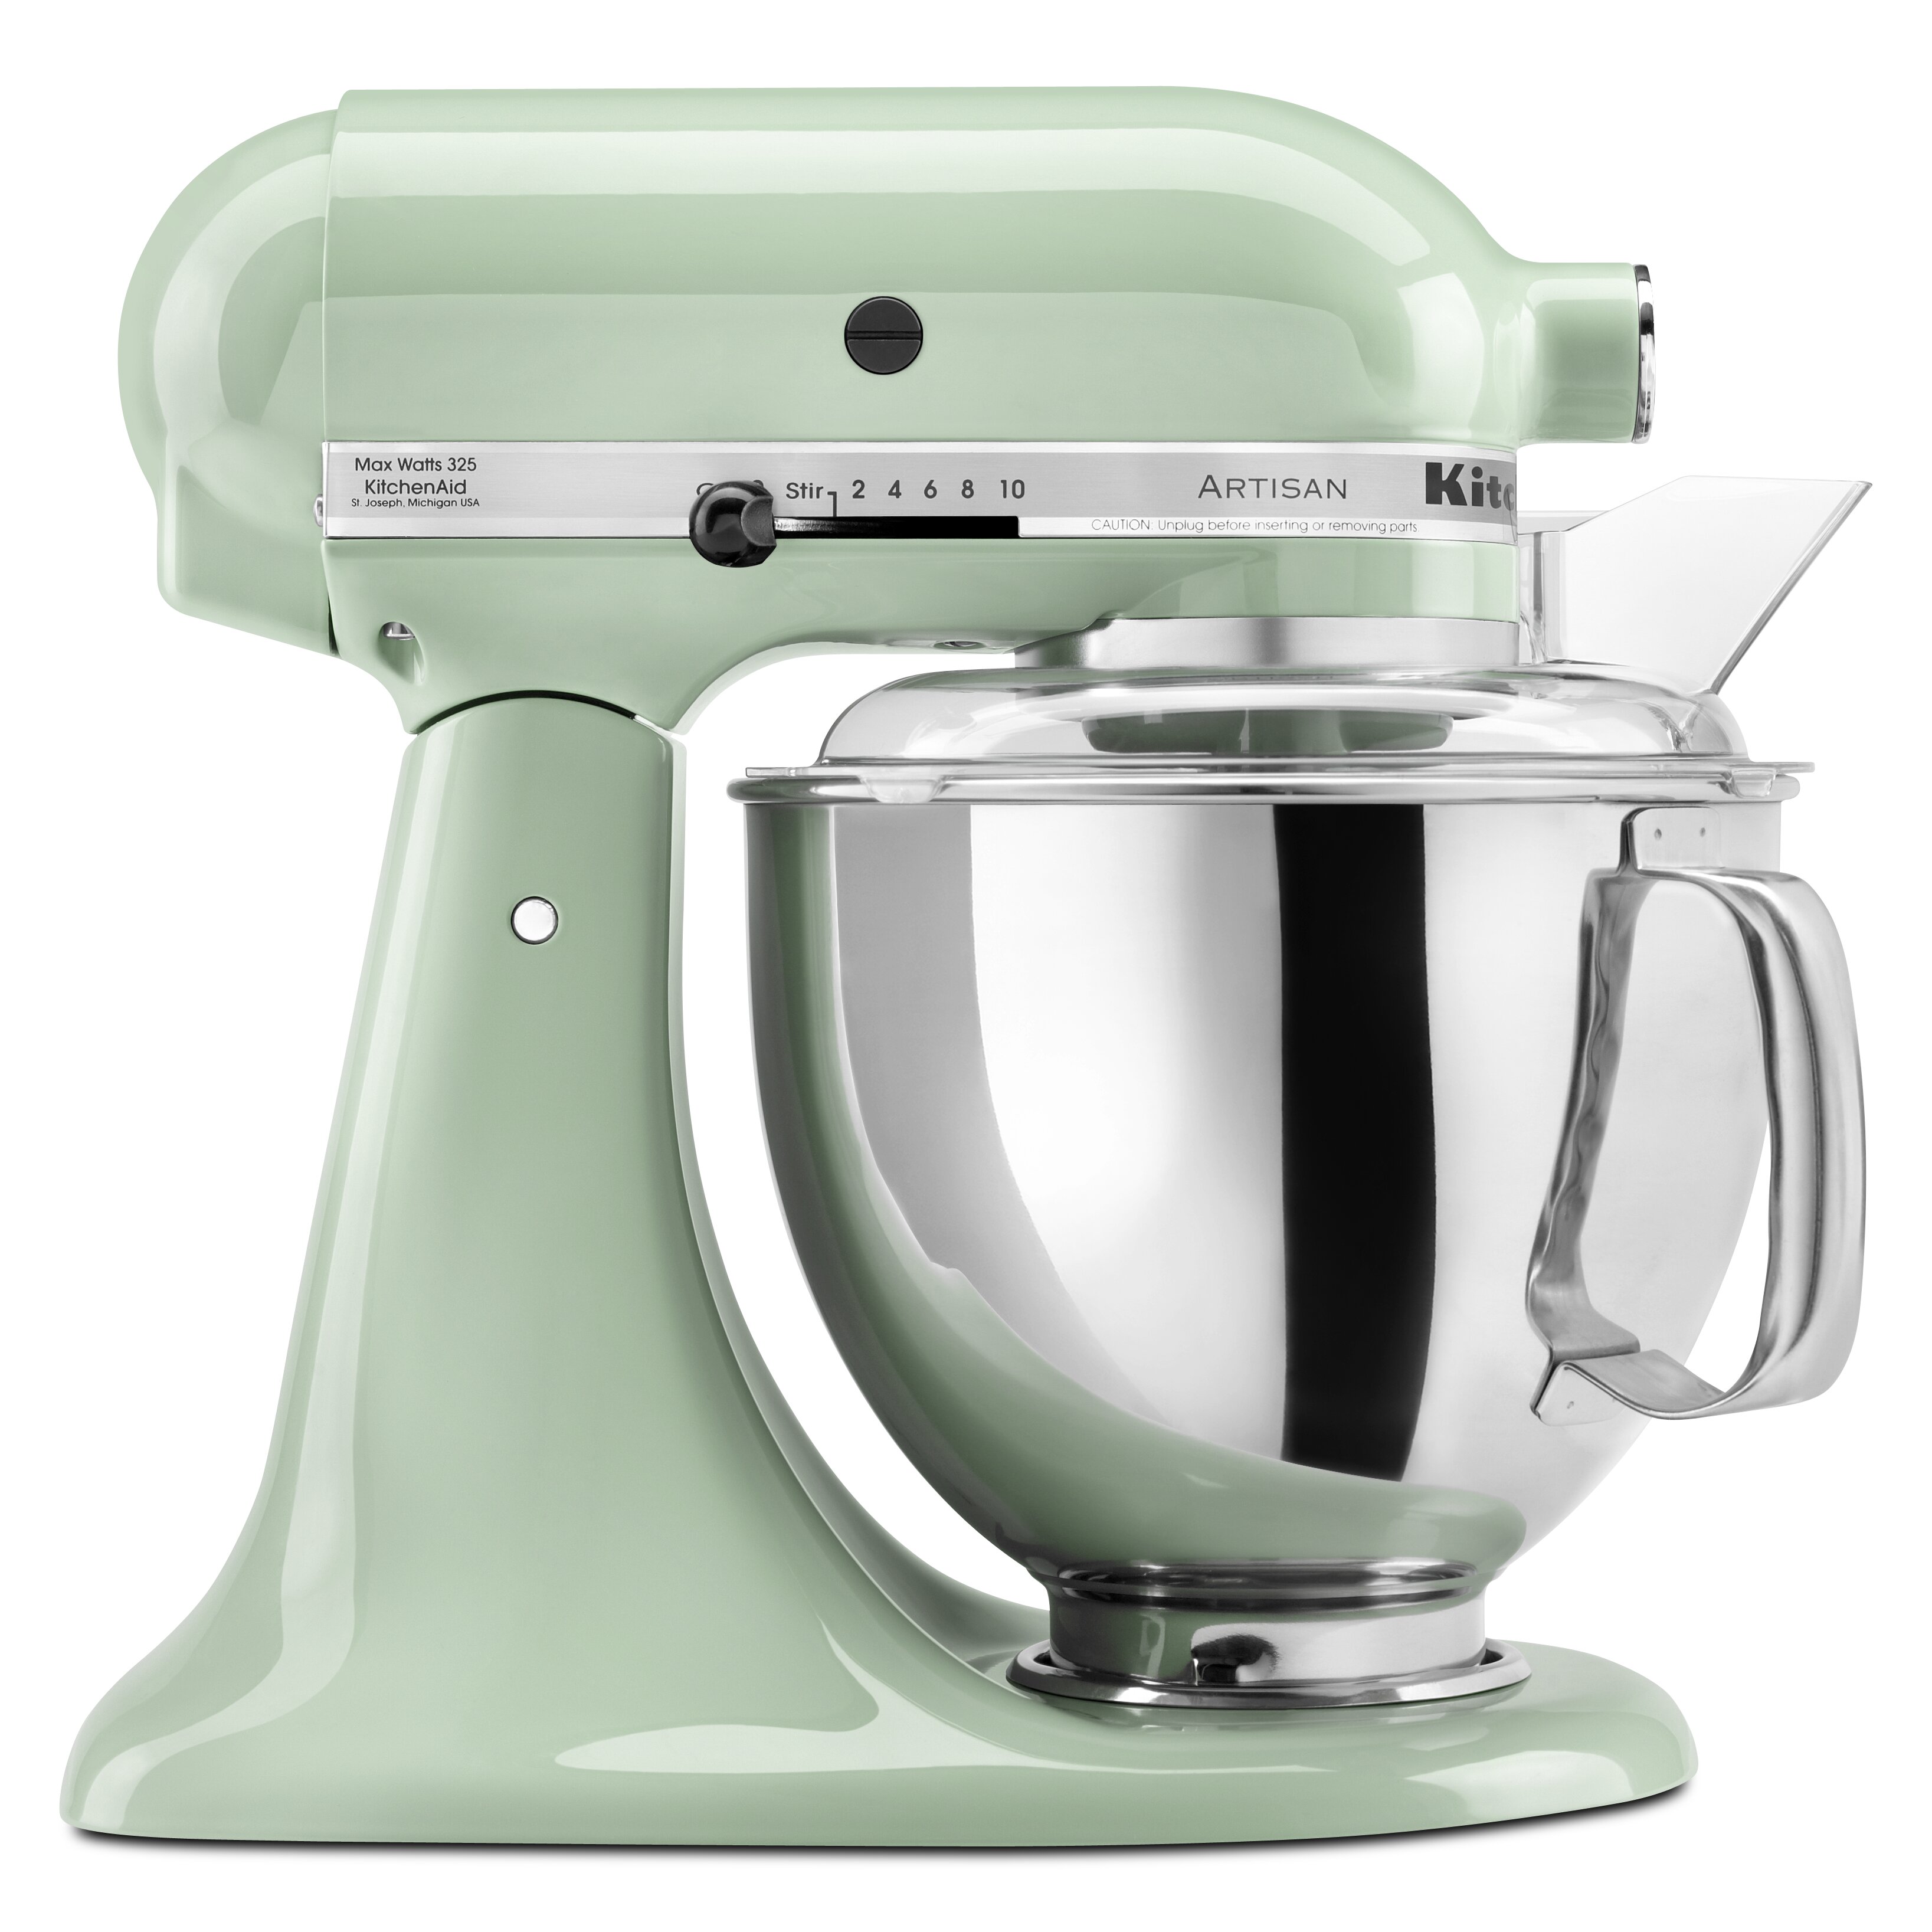 KitchenAid Artisan Series 5 Qt. Stand Mixer with Pouring Shield | Wayfair